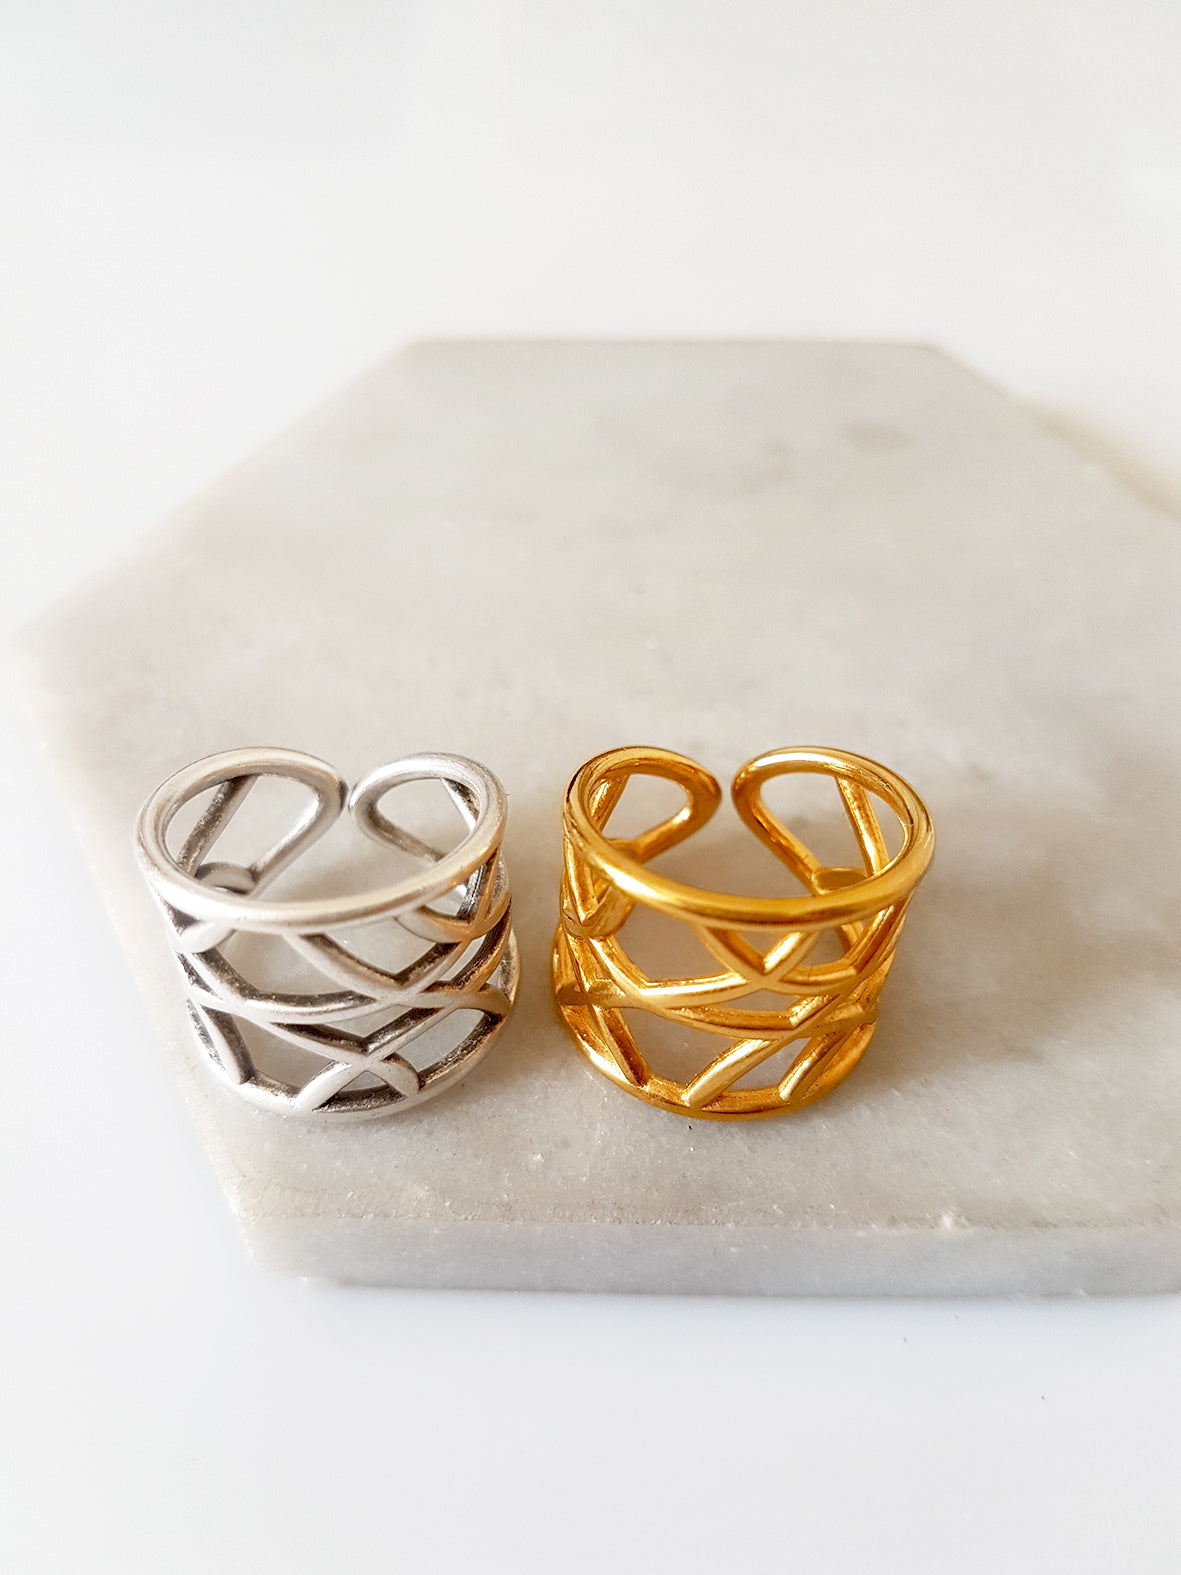 Mesh pattern chevalier ring in a package of 4 pieces - SoCuteb2b